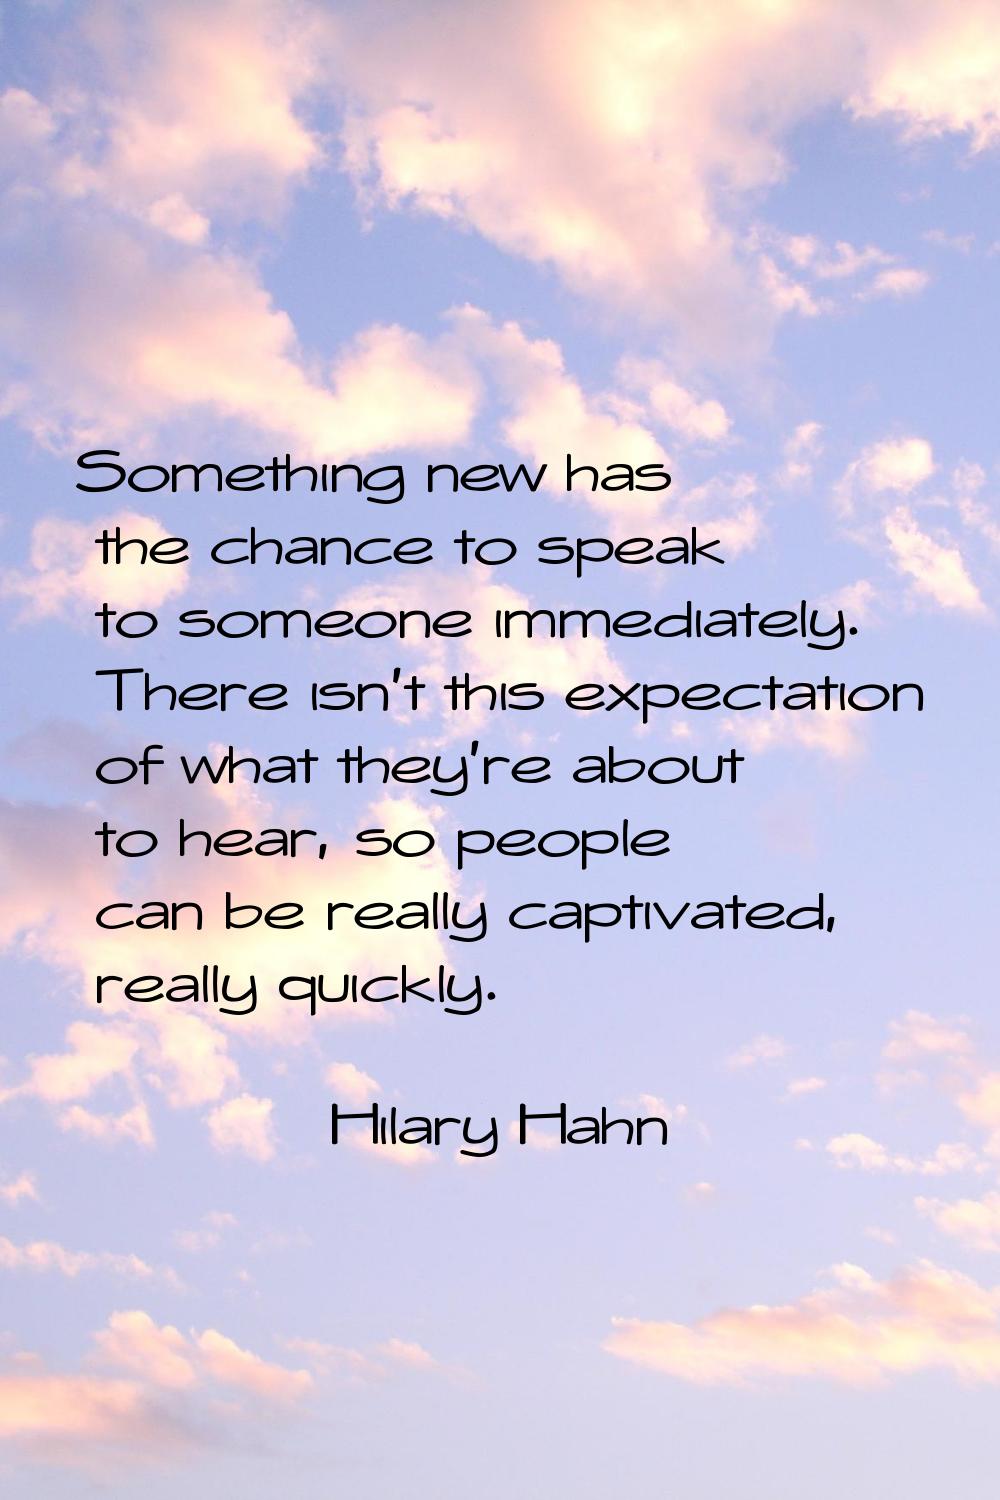 Something new has the chance to speak to someone immediately. There isn't this expectation of what 